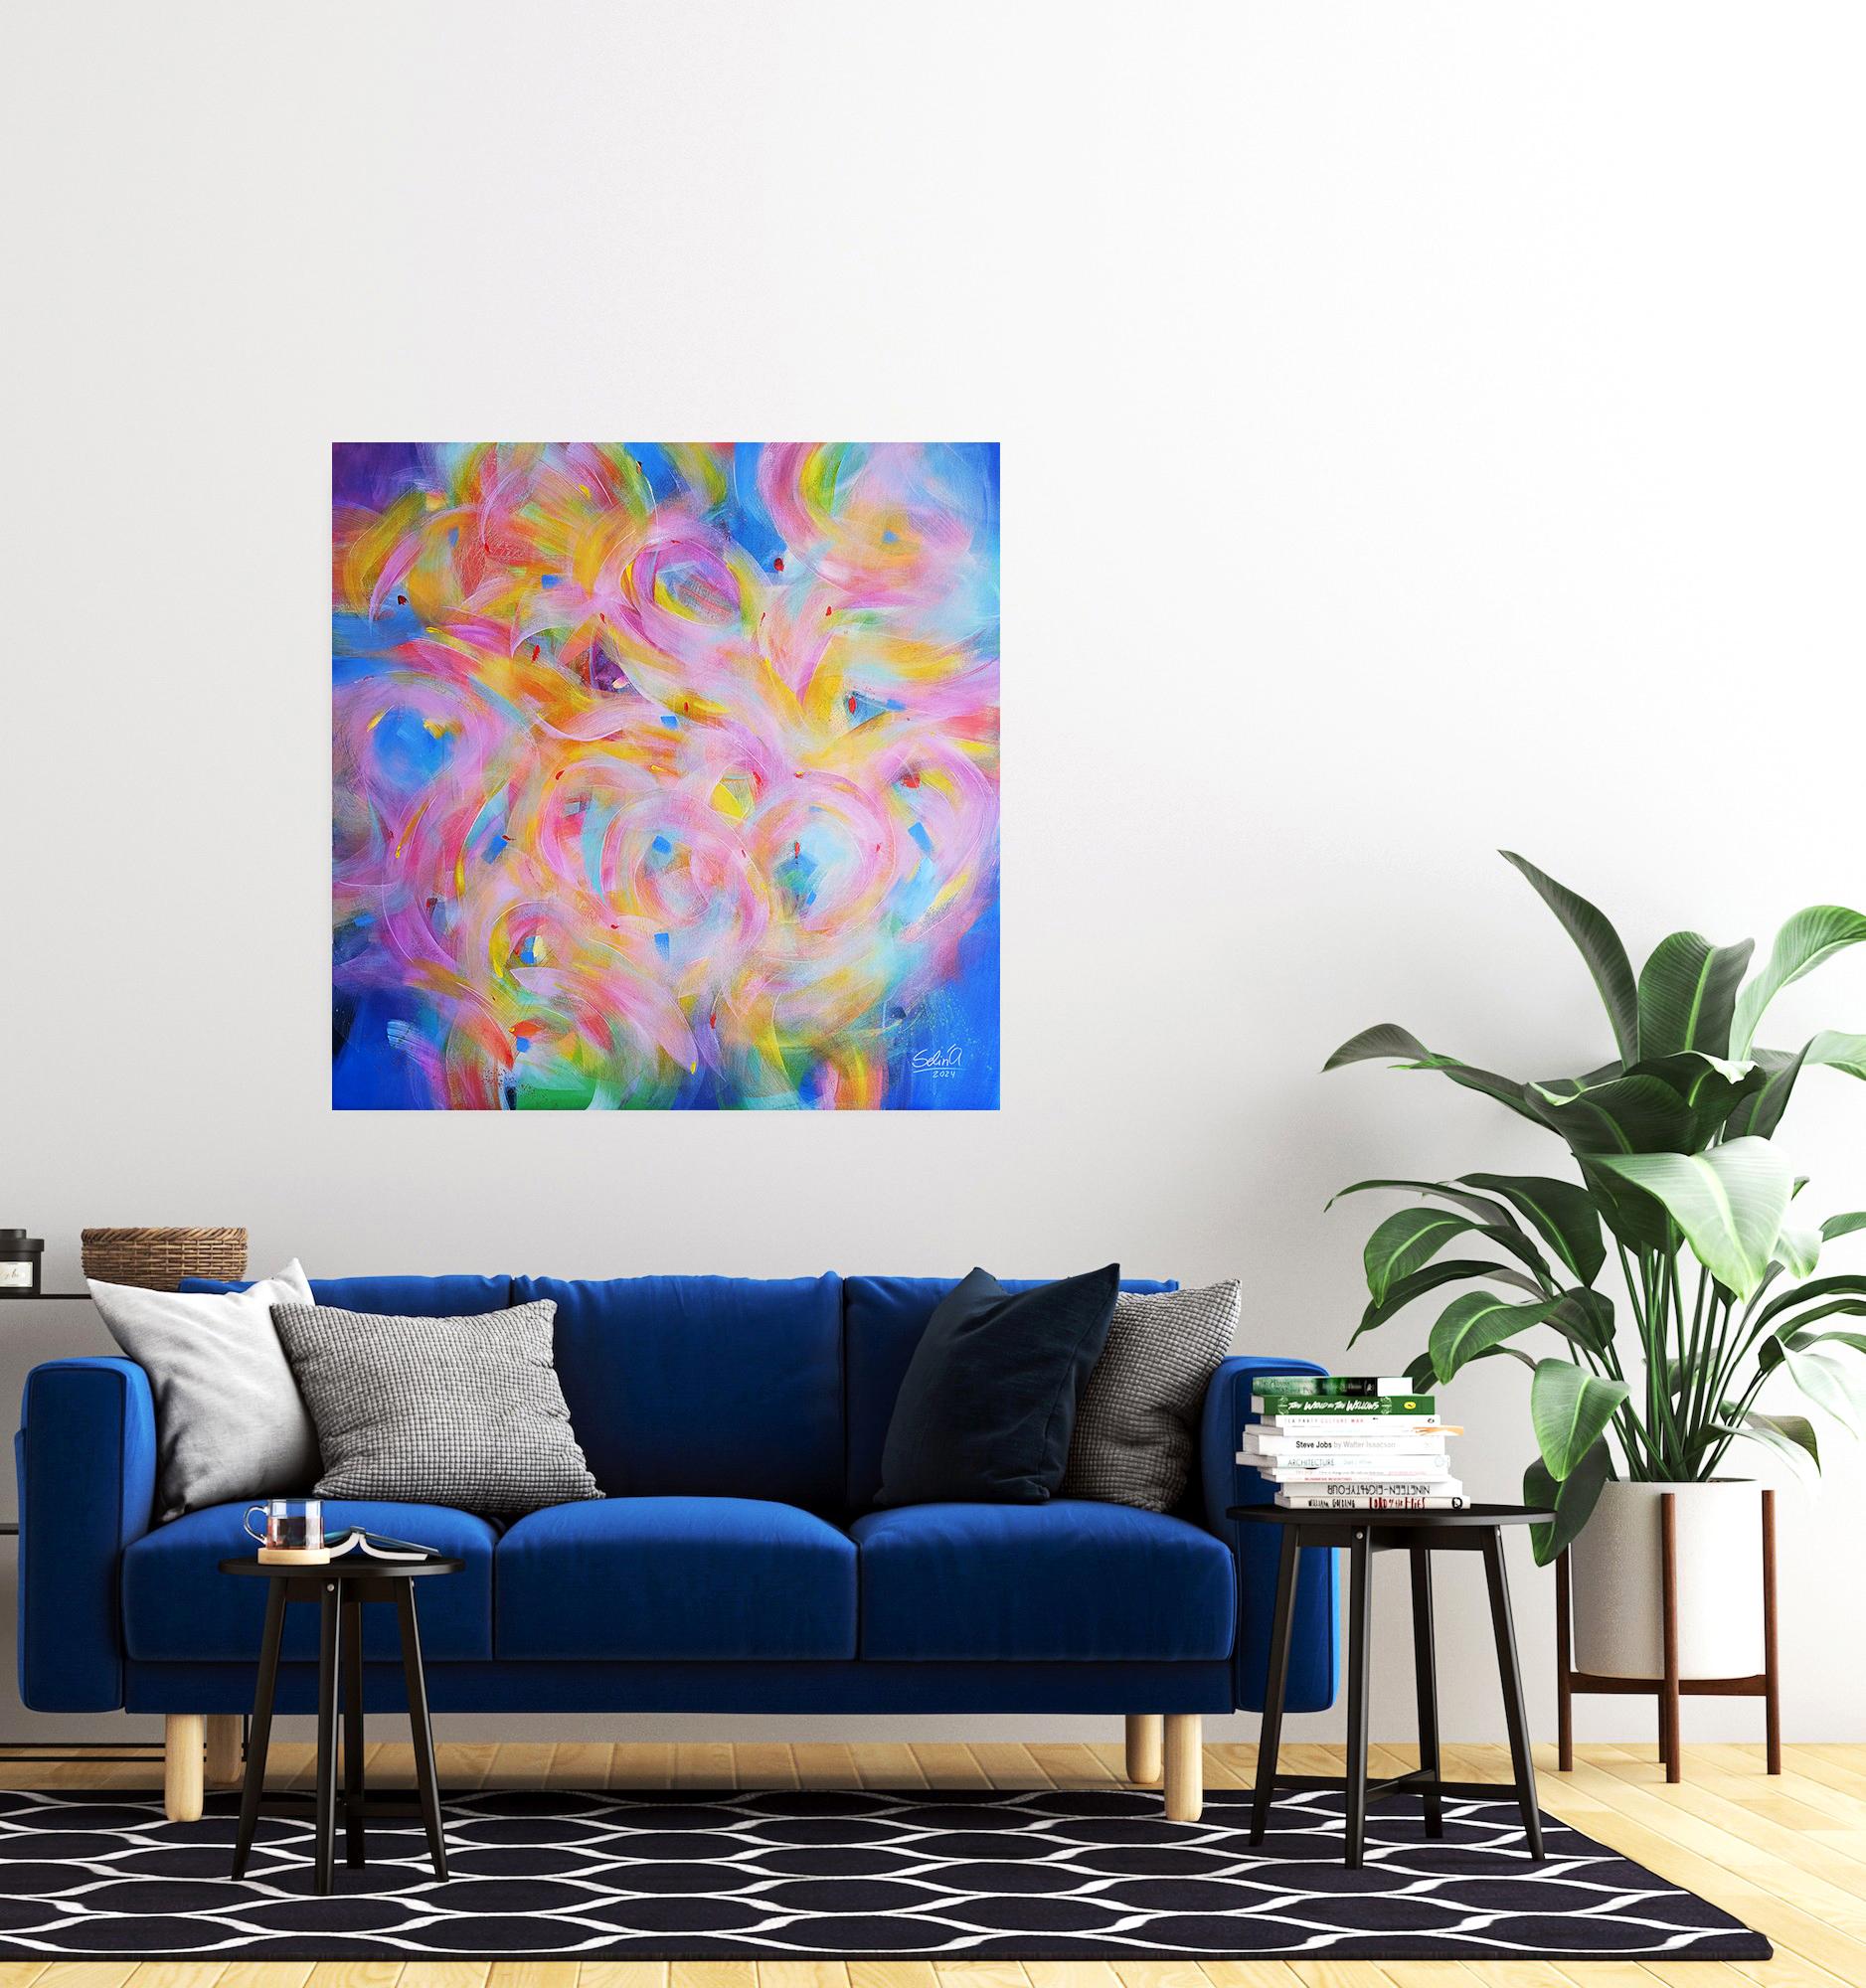 Versatility, Modern Colorful Abstract Painting 100x100cm by Anna Selina For Sale 4